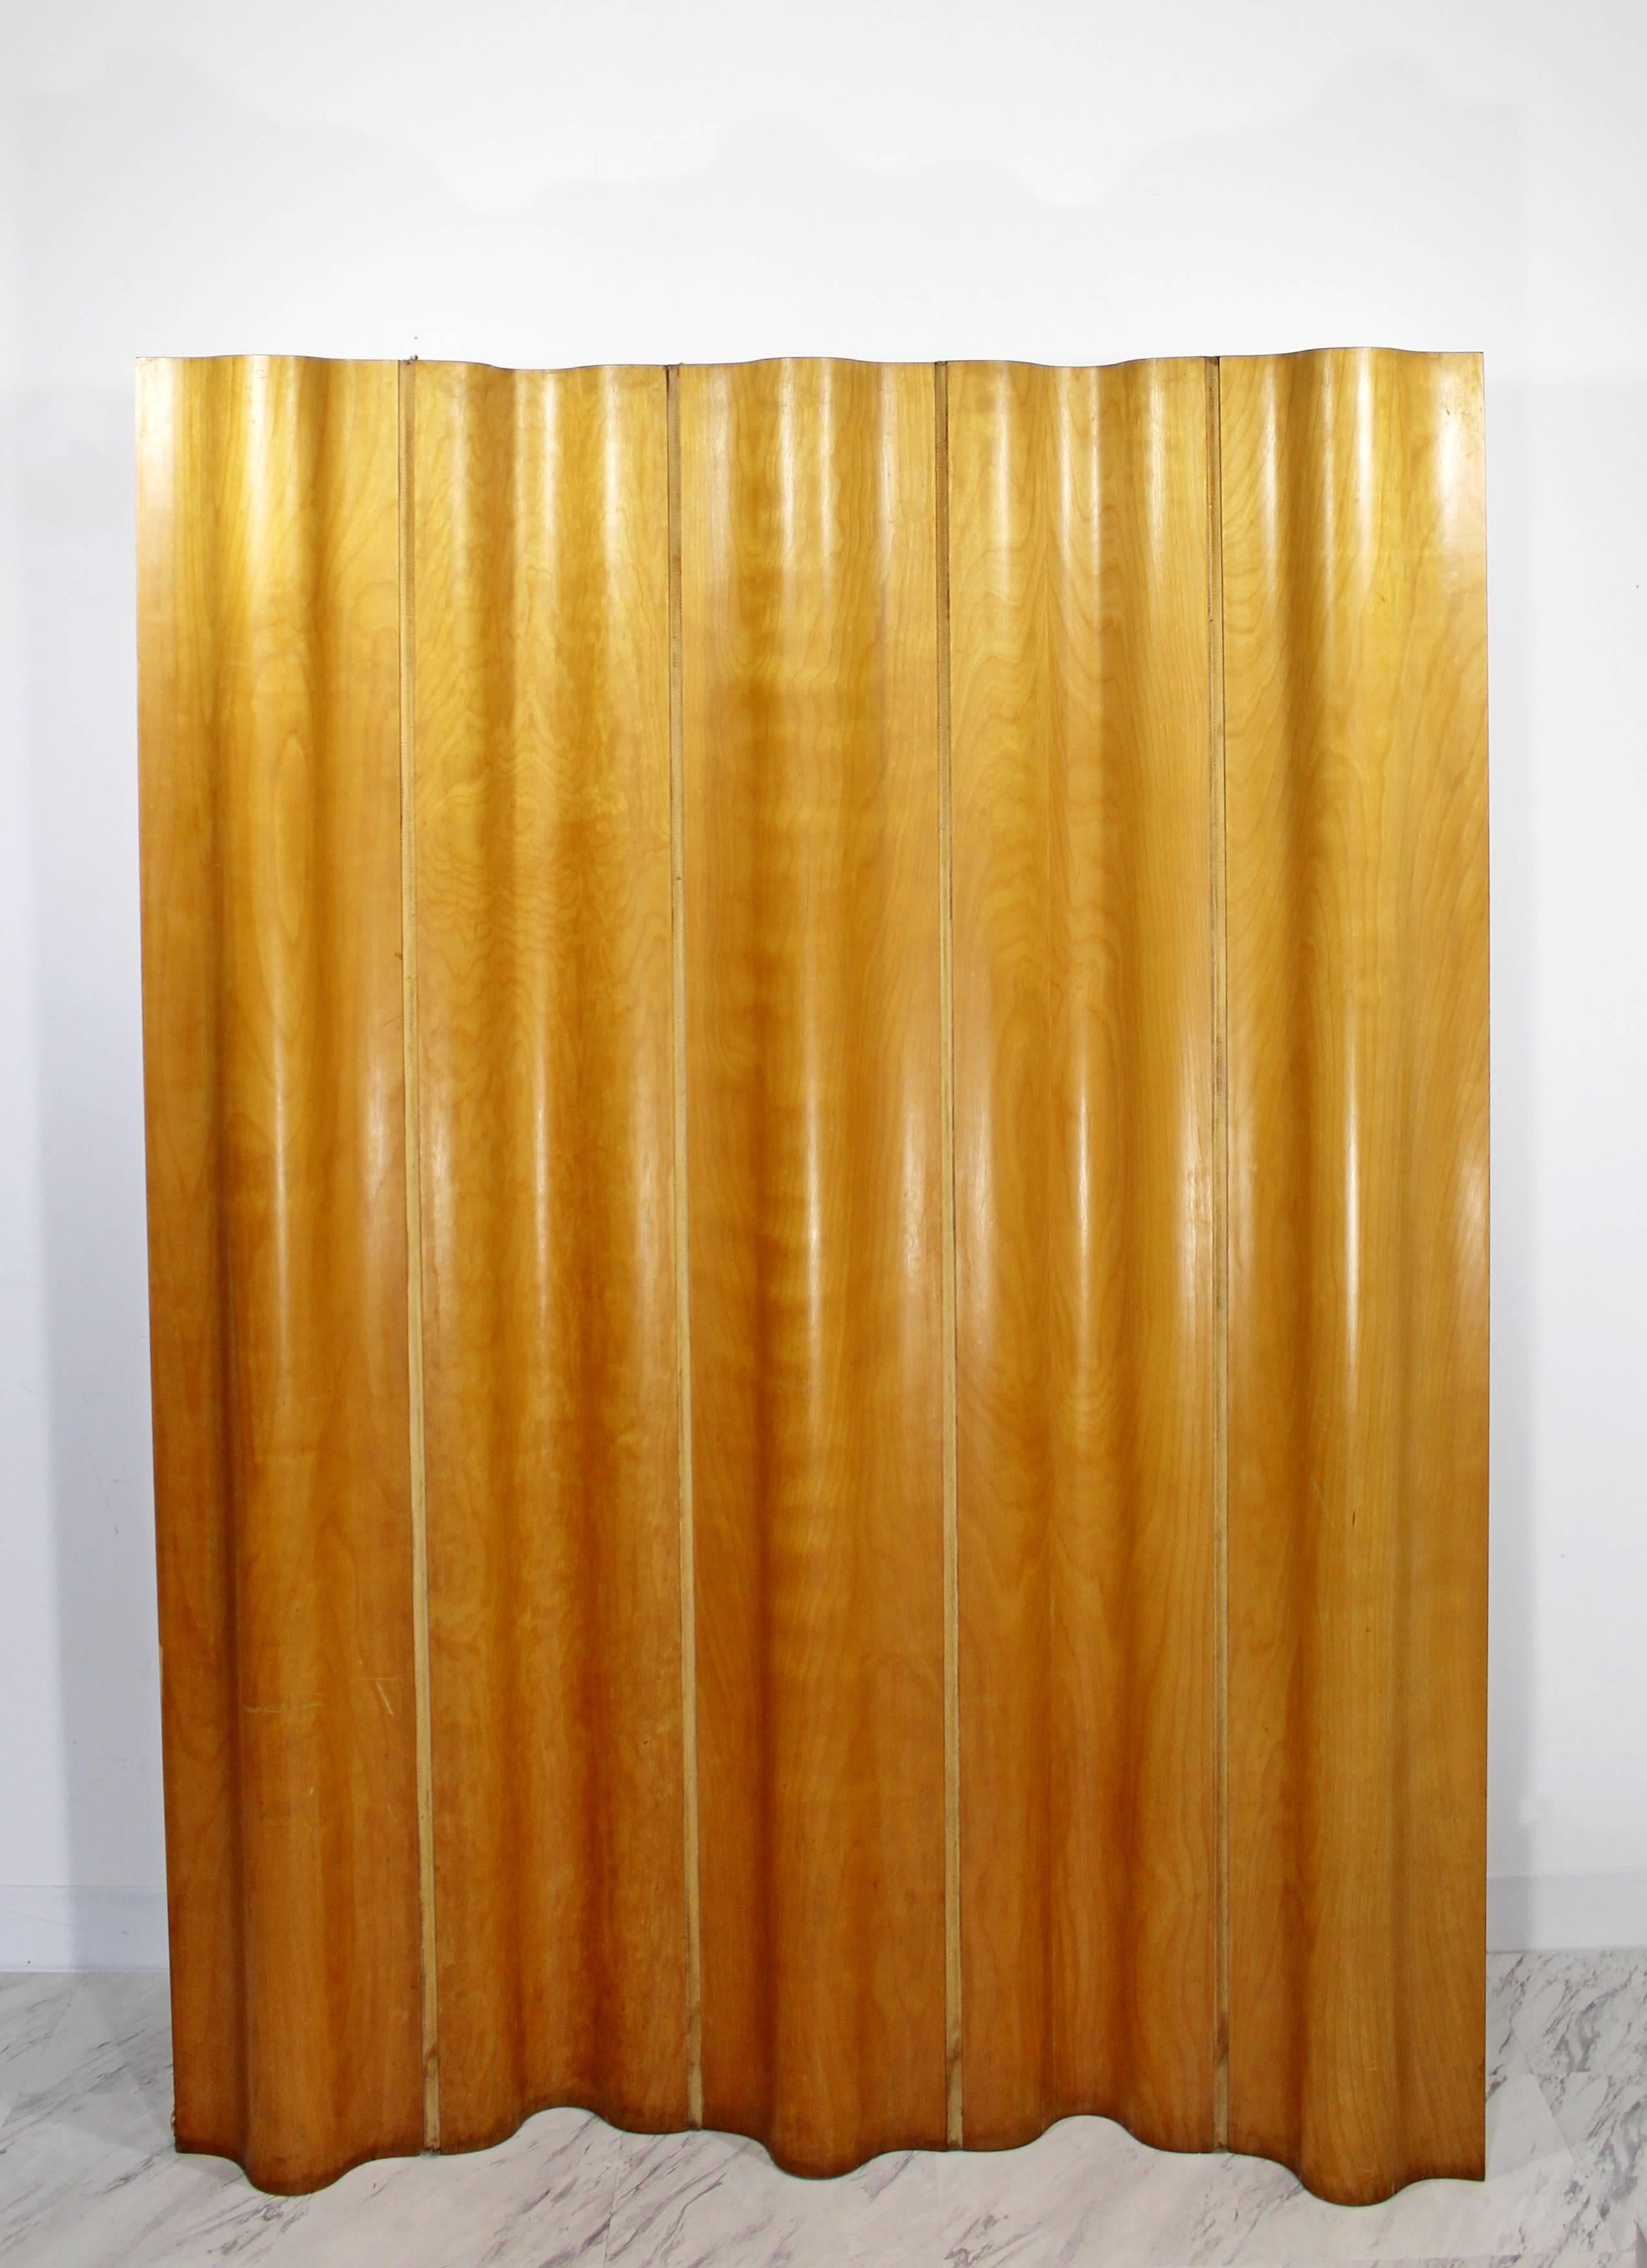 For your consideration is a gorgeous and rare, bentwood, folding screen, made of ash and held together by a woven canvas, designed by Ray & Charles Eames in 1946. This is a vintage Herman Miller production, not a contemporary reproduction. In very